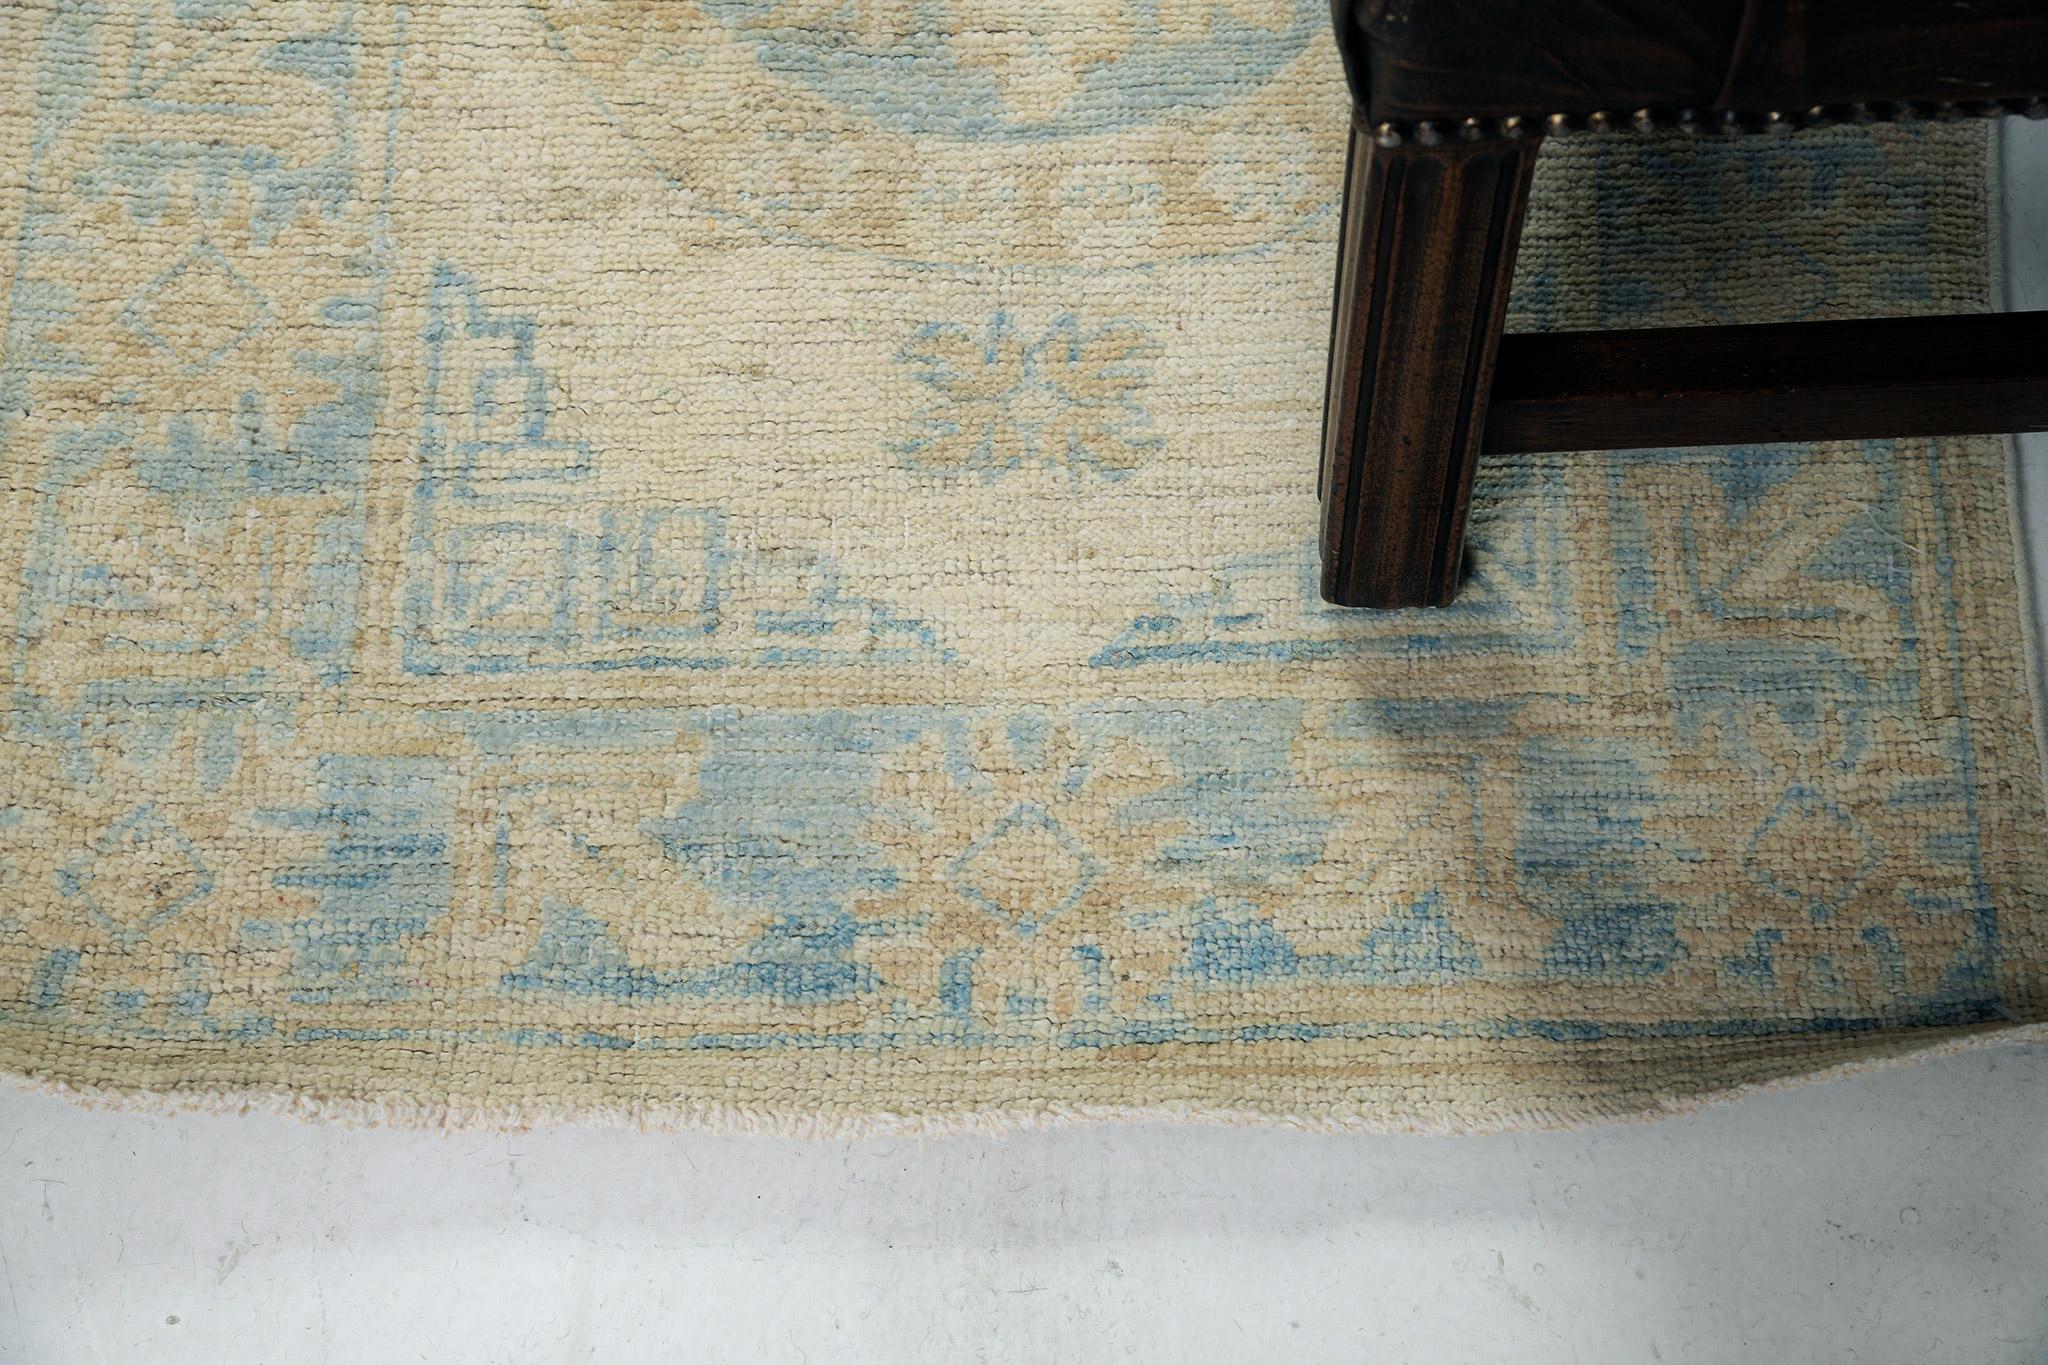 Mehraban 18th Century Khotan Design Revival Rug In New Condition For Sale In WEST HOLLYWOOD, CA